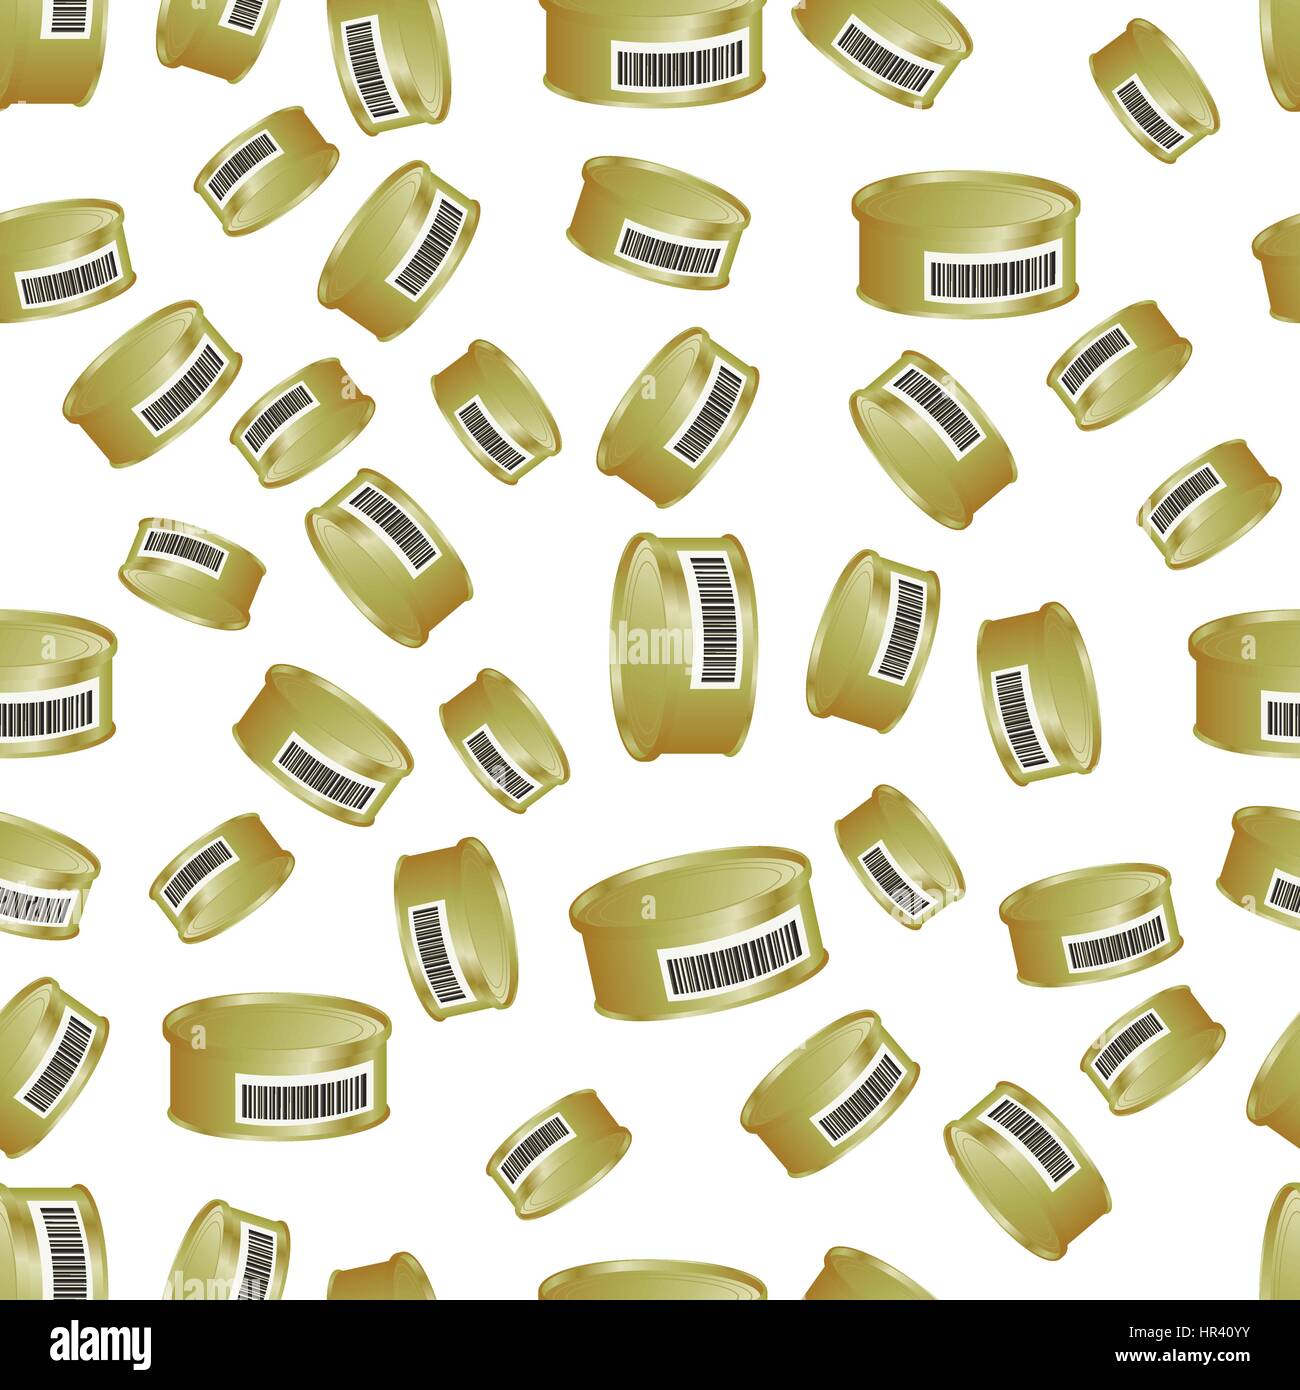 Metal Cans Seamless Pattern Stock Vector